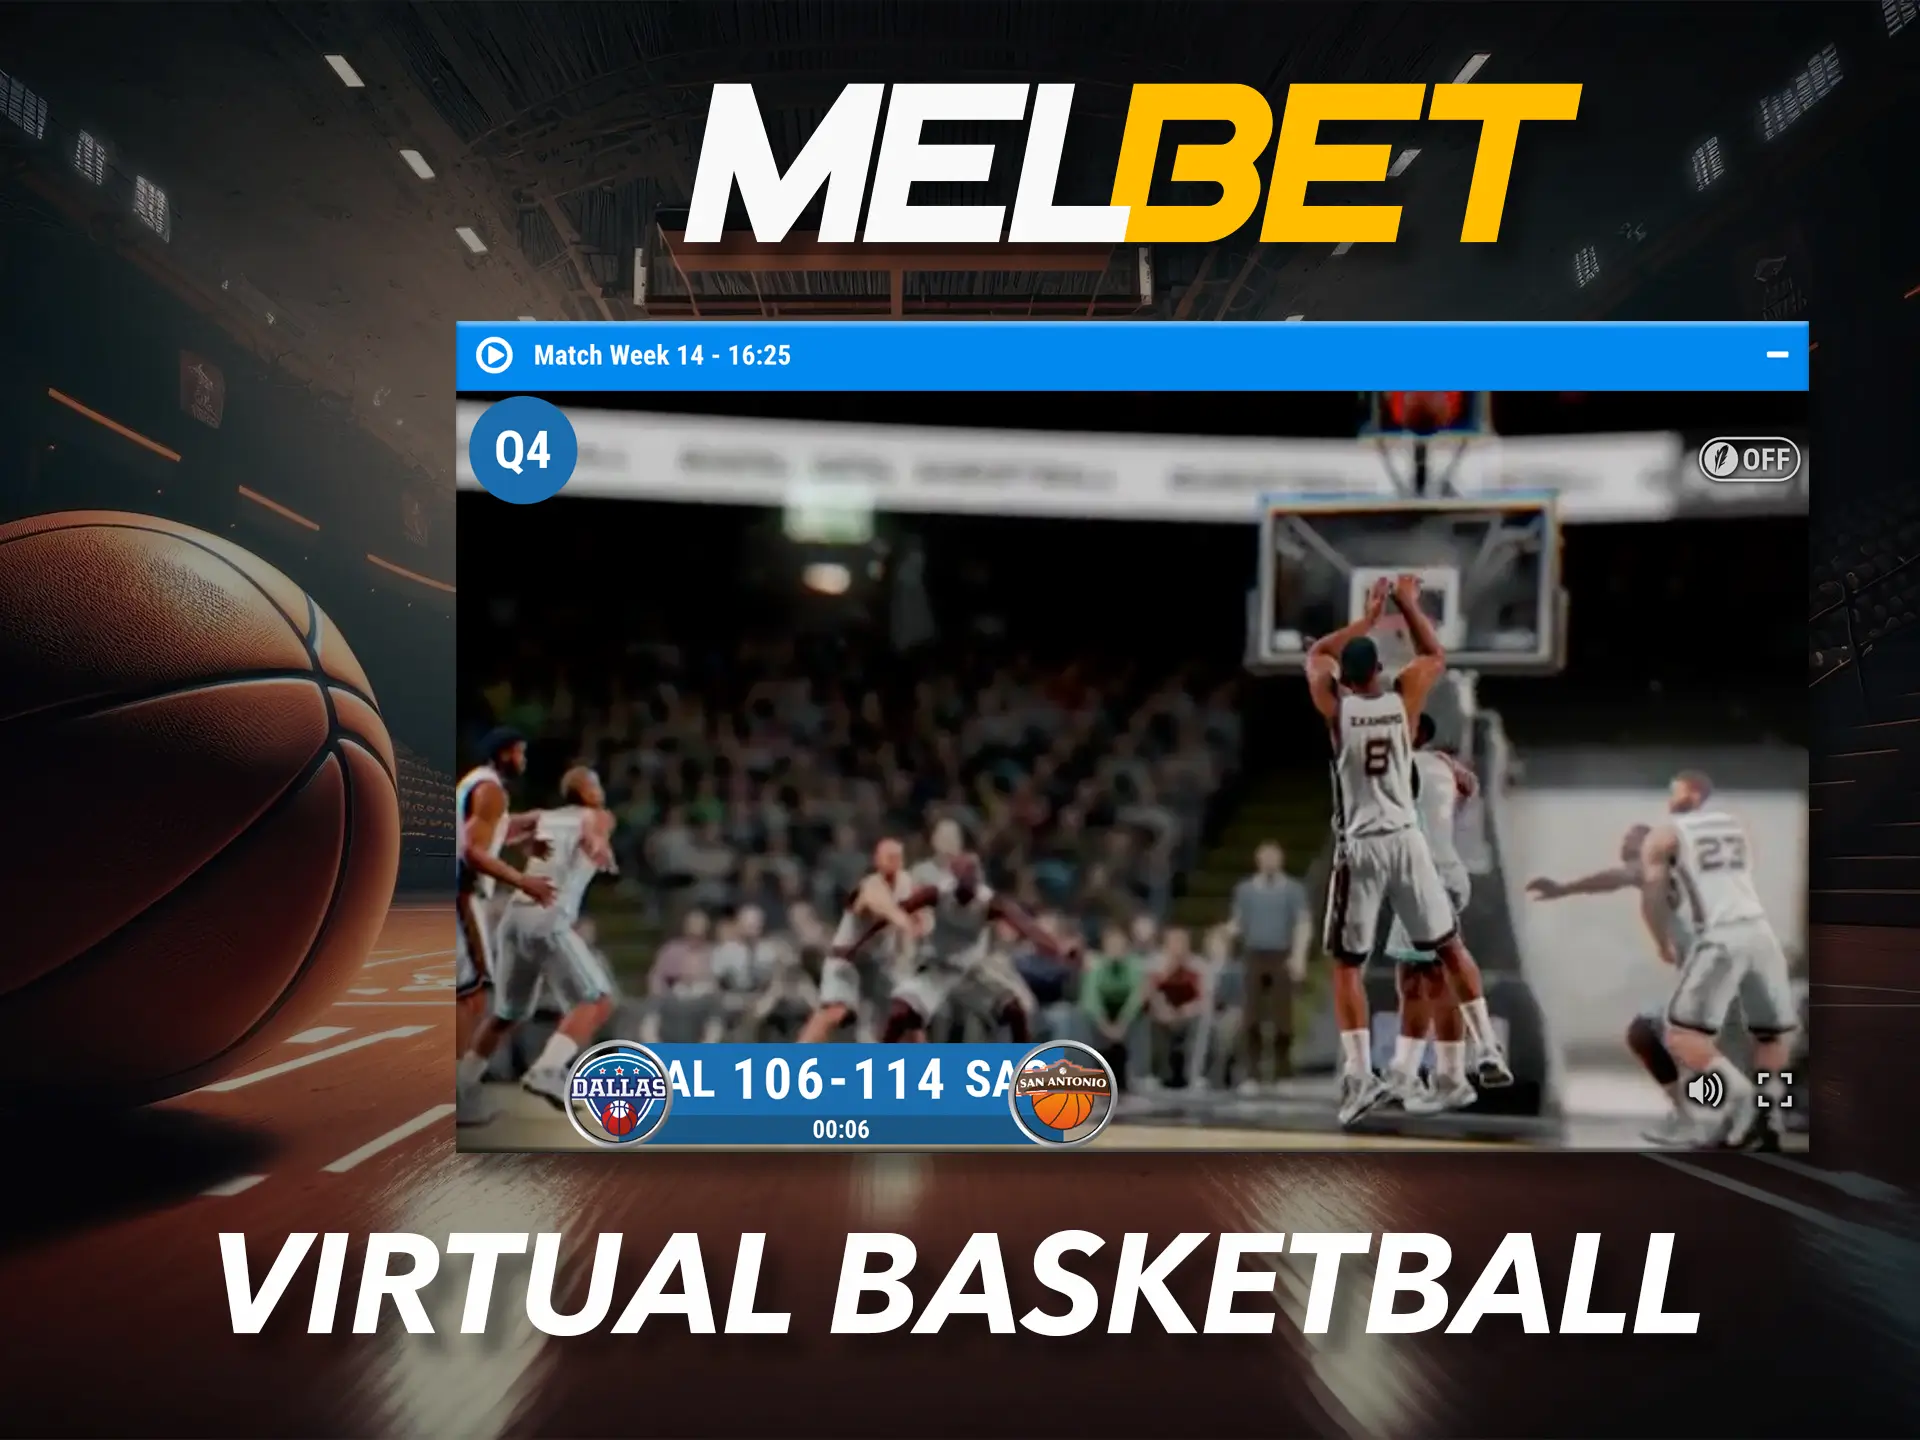 Watch the virtual basketball players play and place your bets at Melbet.